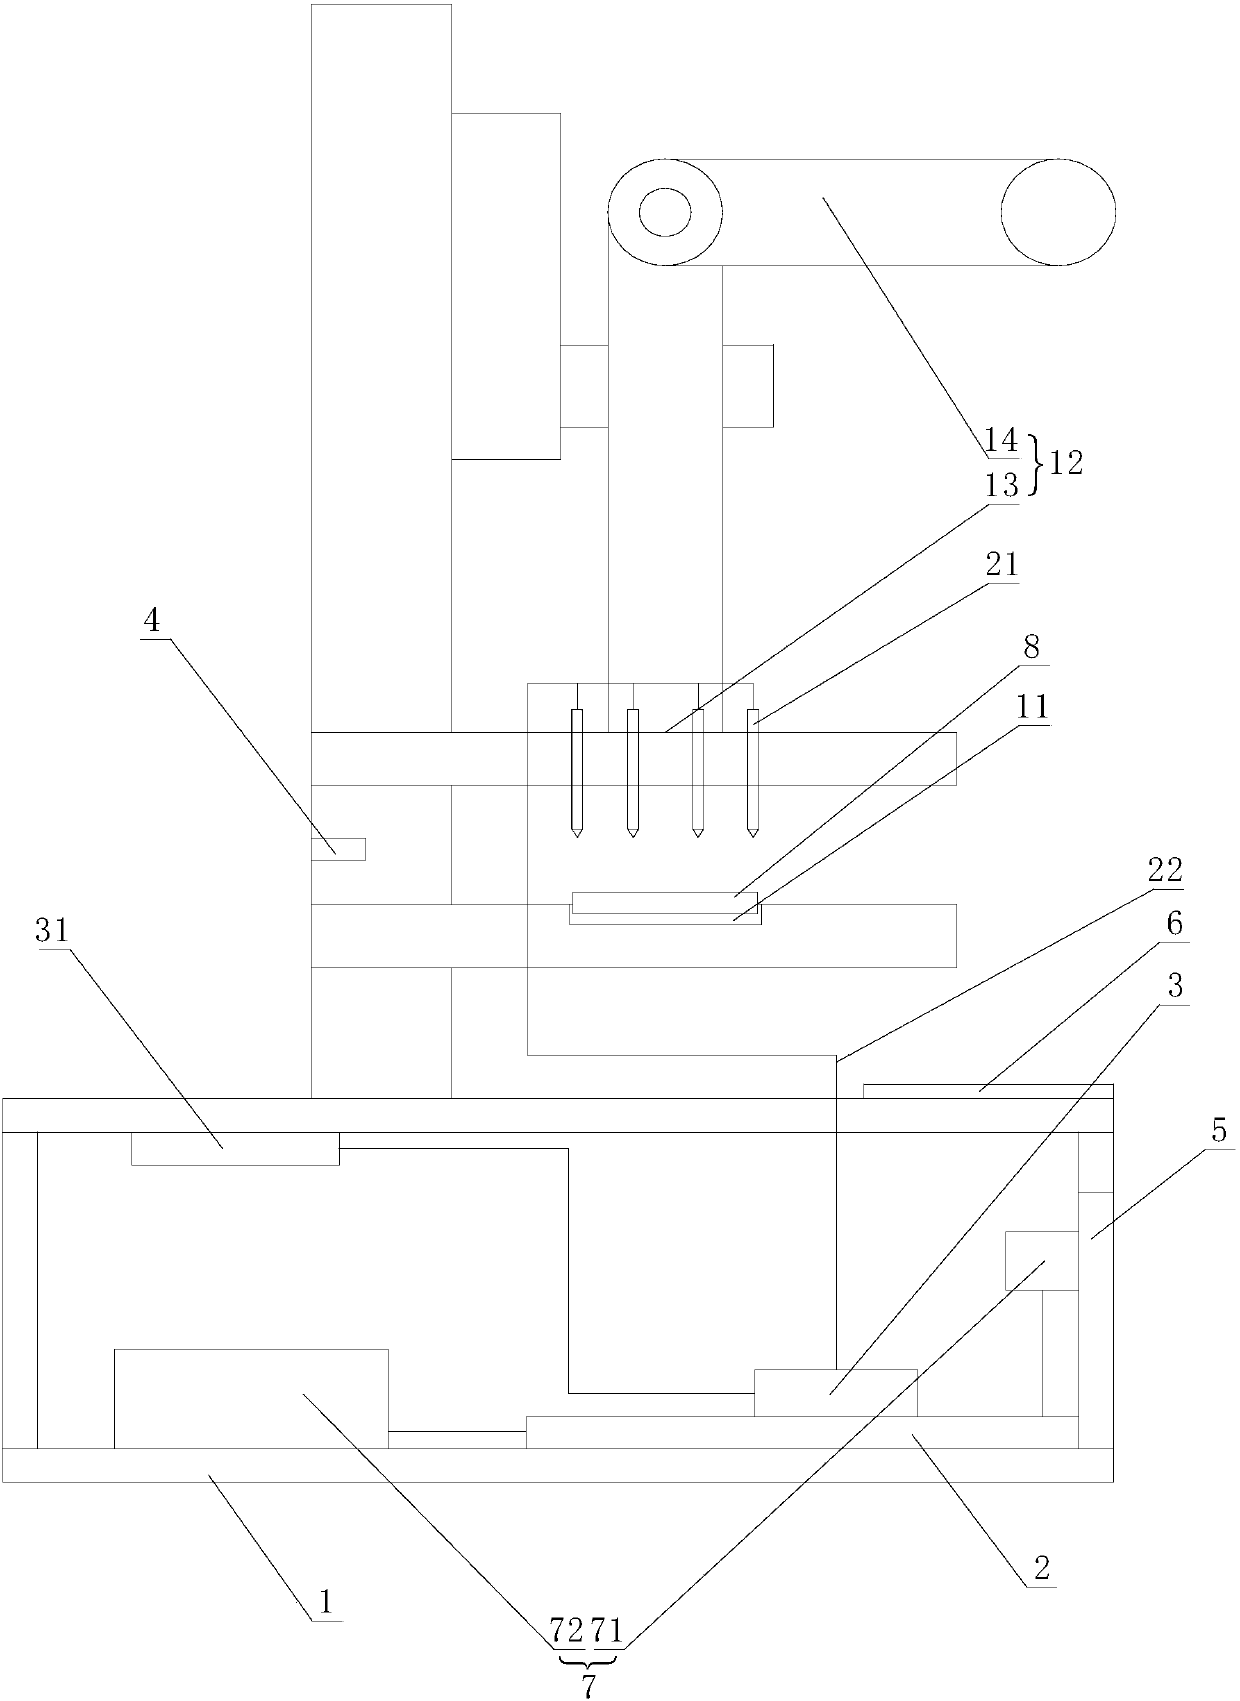 Internet-of-Things instrument paster SIM card performance detection apparatus and method therefor